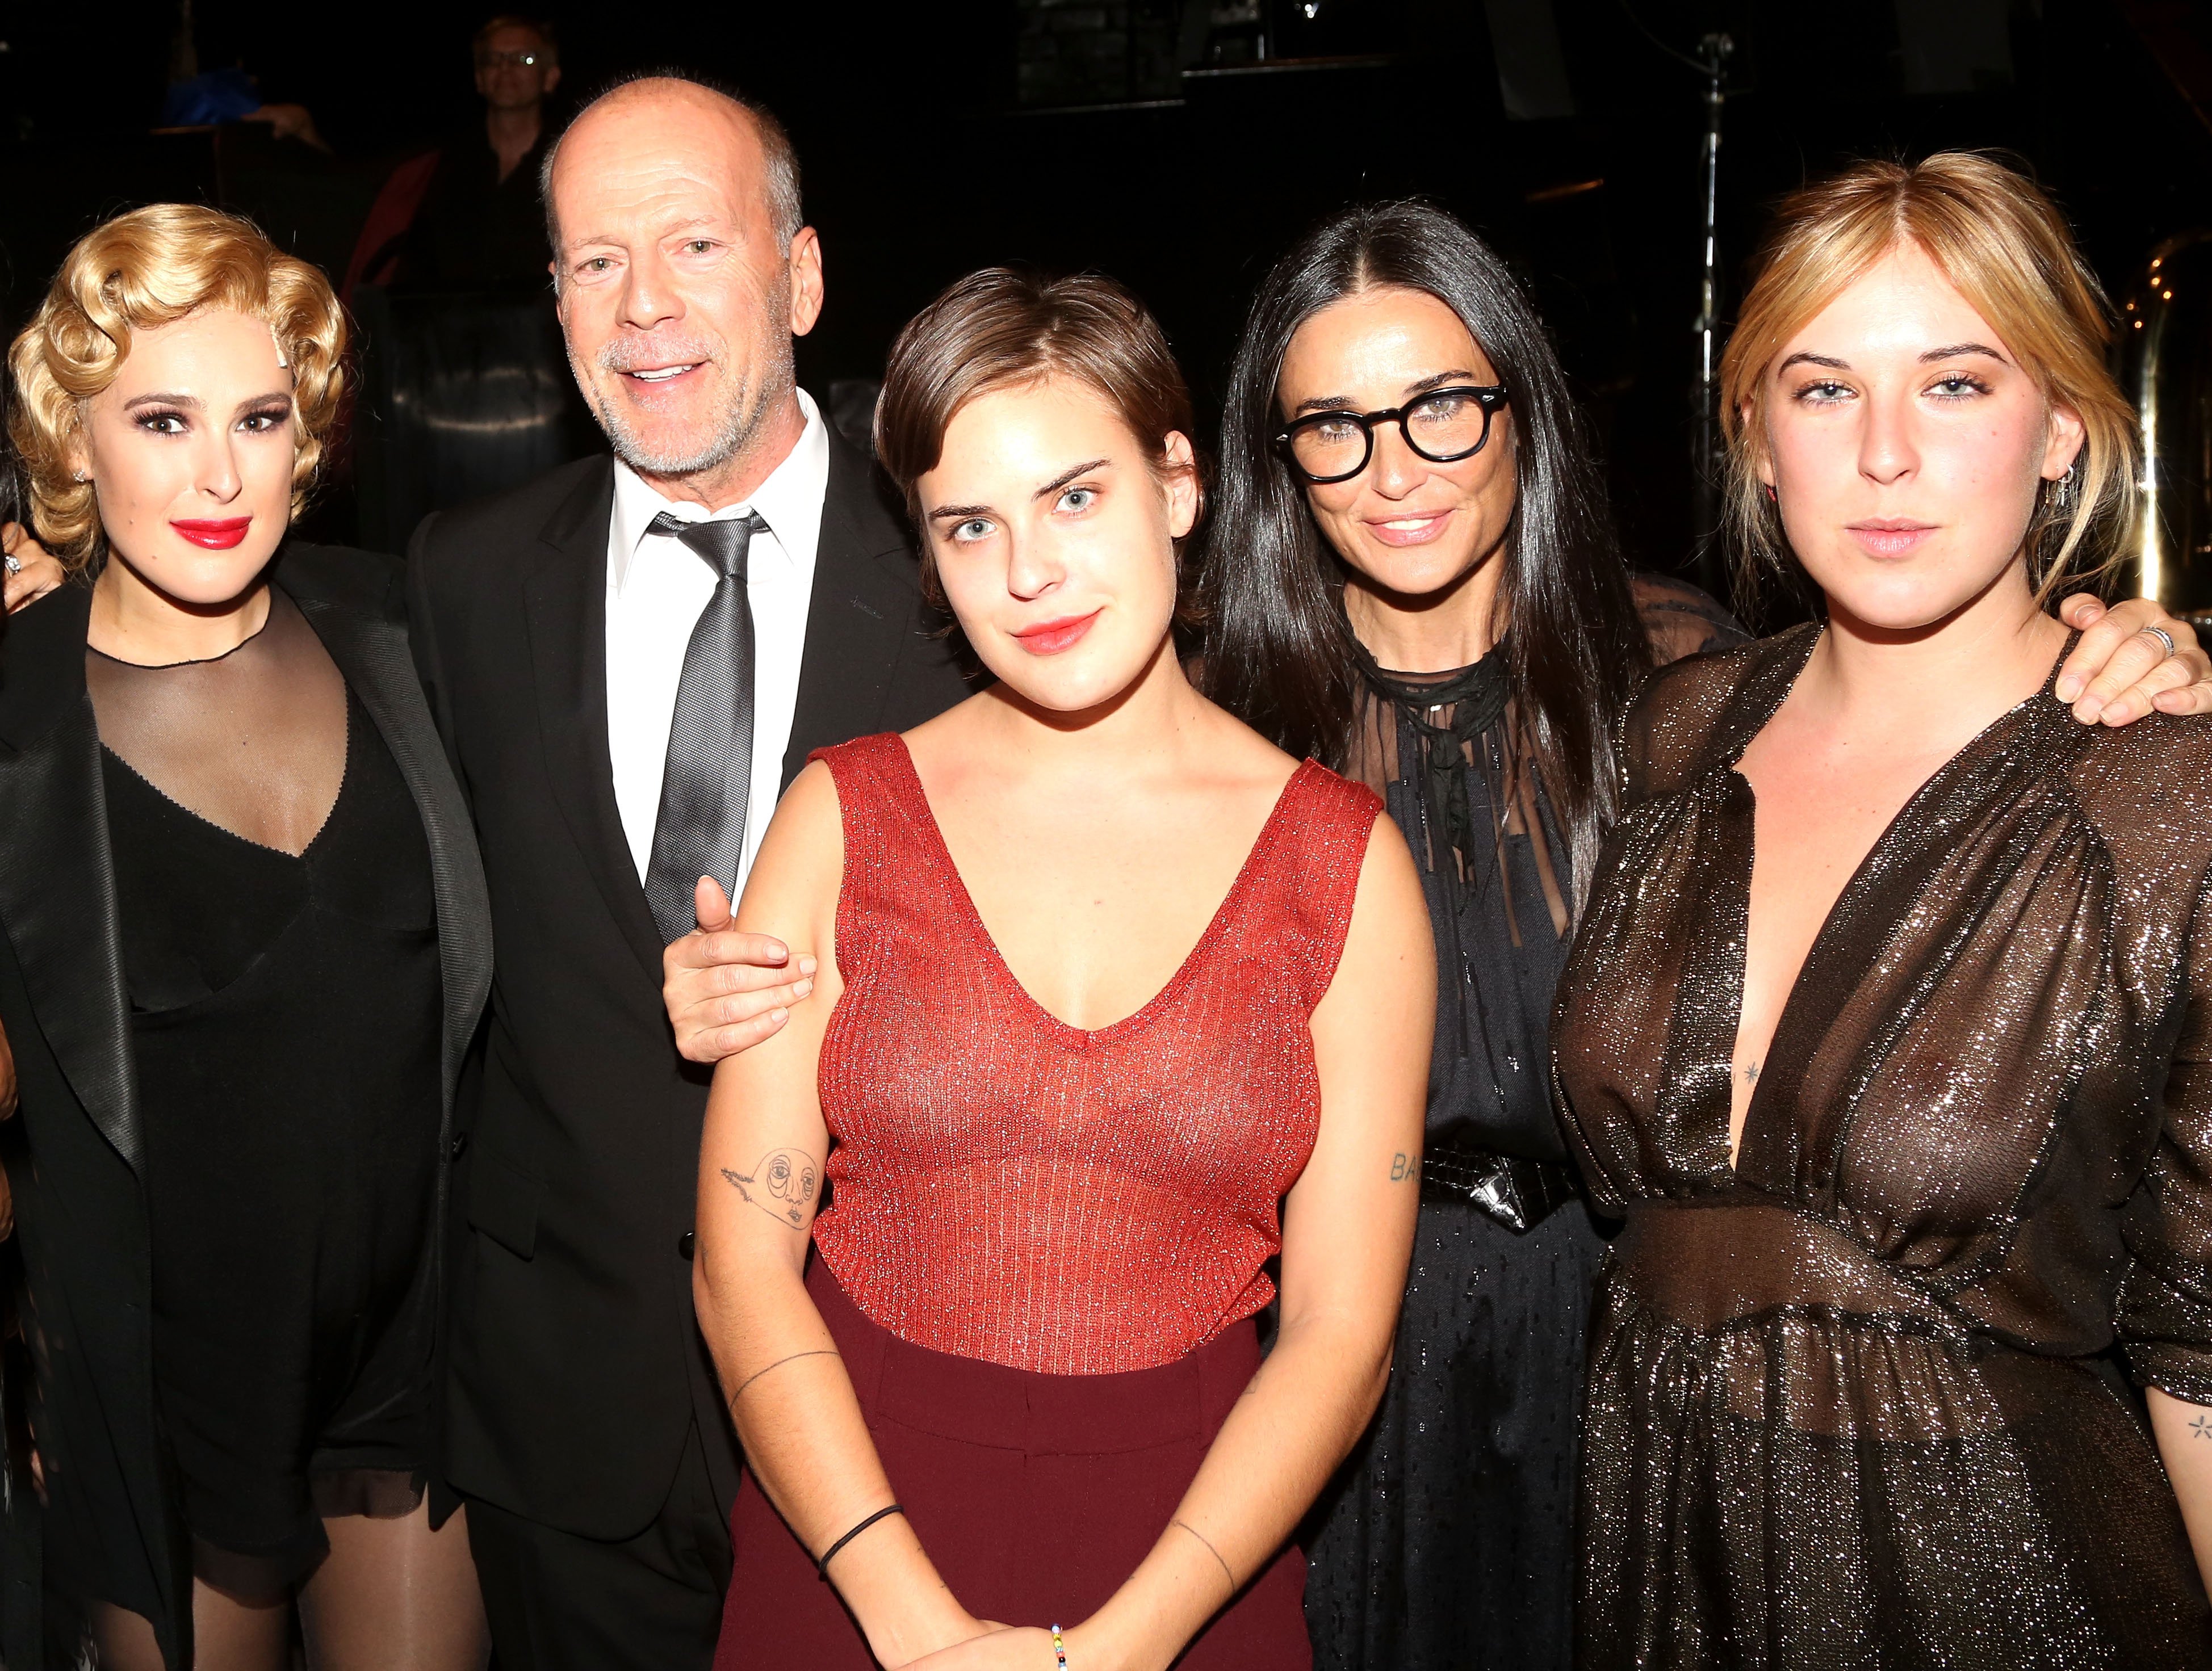 Rumer Willis, Bruce Willis, Tallulah Belle Willis, Demi Moore and Scout LaRue Willis posing backstage as Rumer makes her broadway debut as "Roxie Hart" in Broadway's "Chicago" on Broadway at The Ambassador Theater on September 21, 2015 in New York City. / Source: Getty Images